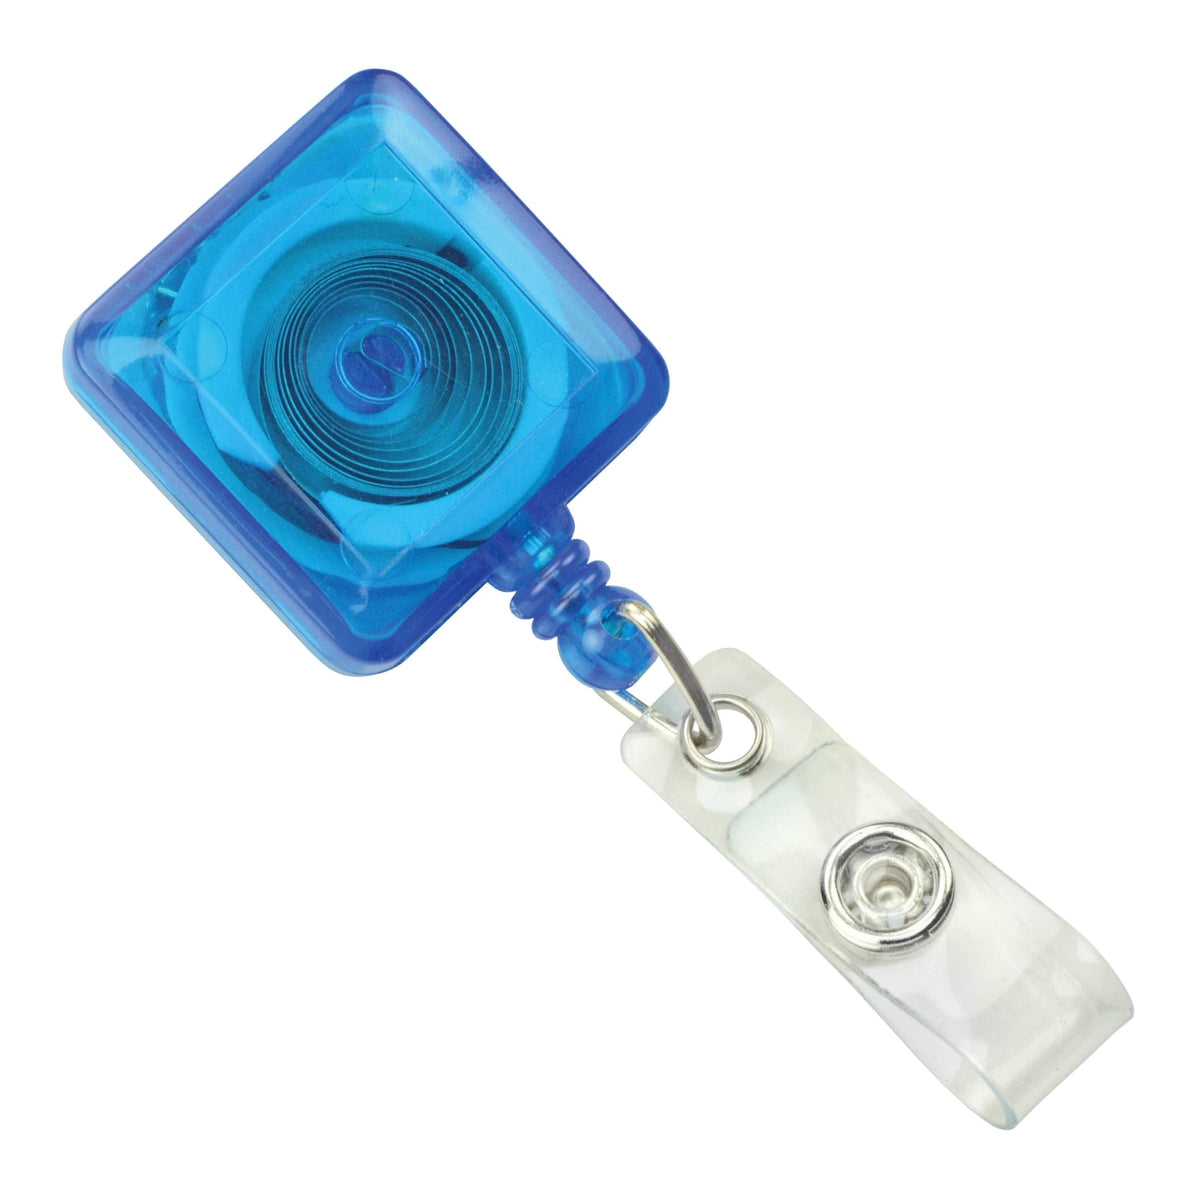 Translucent Blue Retractable Badge Reel With Spring Clip P/N 2120